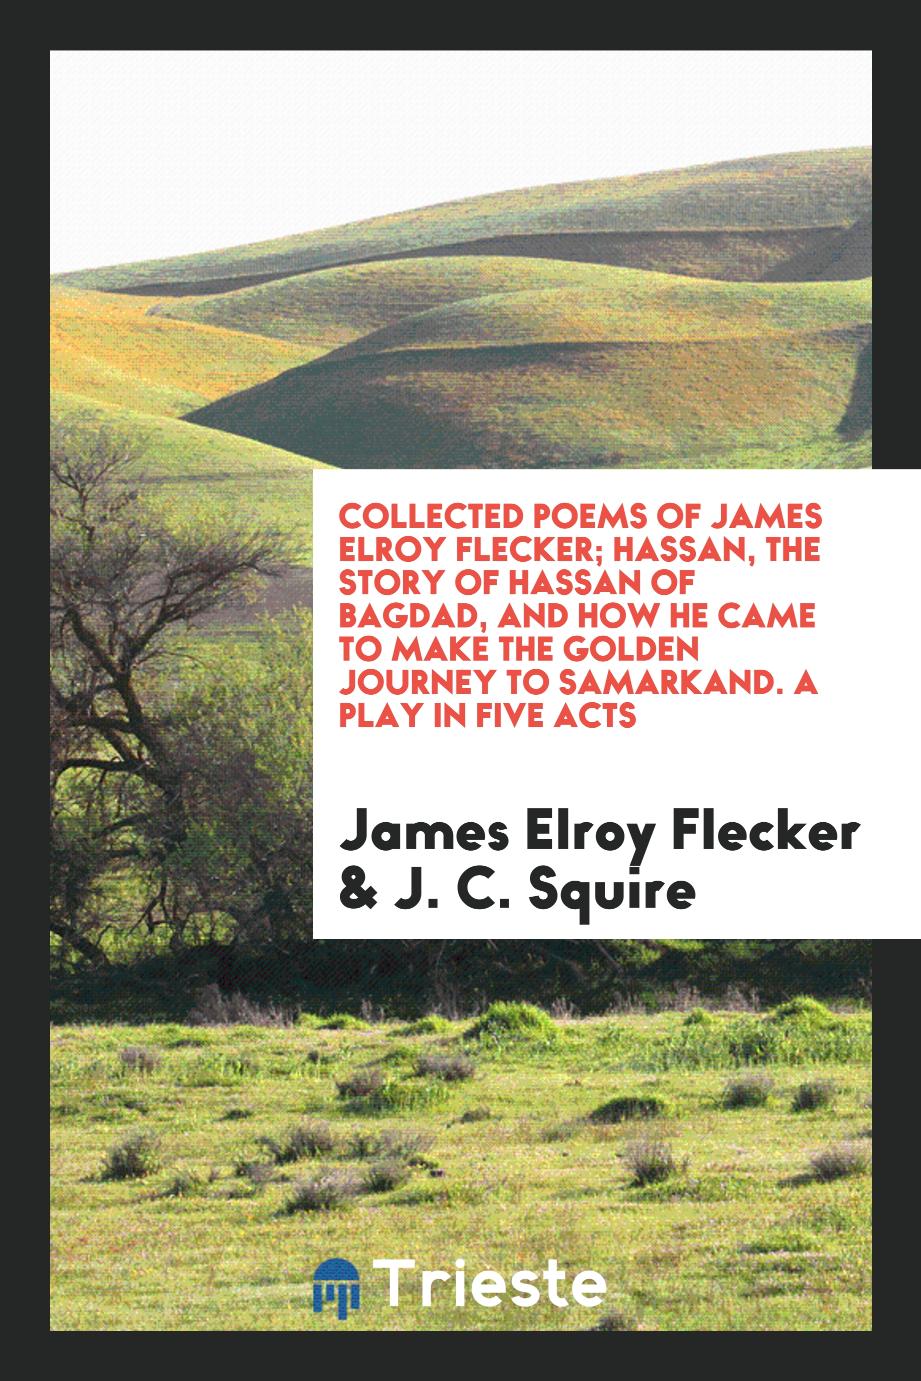 Collected Poems of James Elroy Flecker; Hassan, the Story of Hassan of Bagdad, and How He Came to Make the Golden Journey to Samarkand. A Play in Five Acts